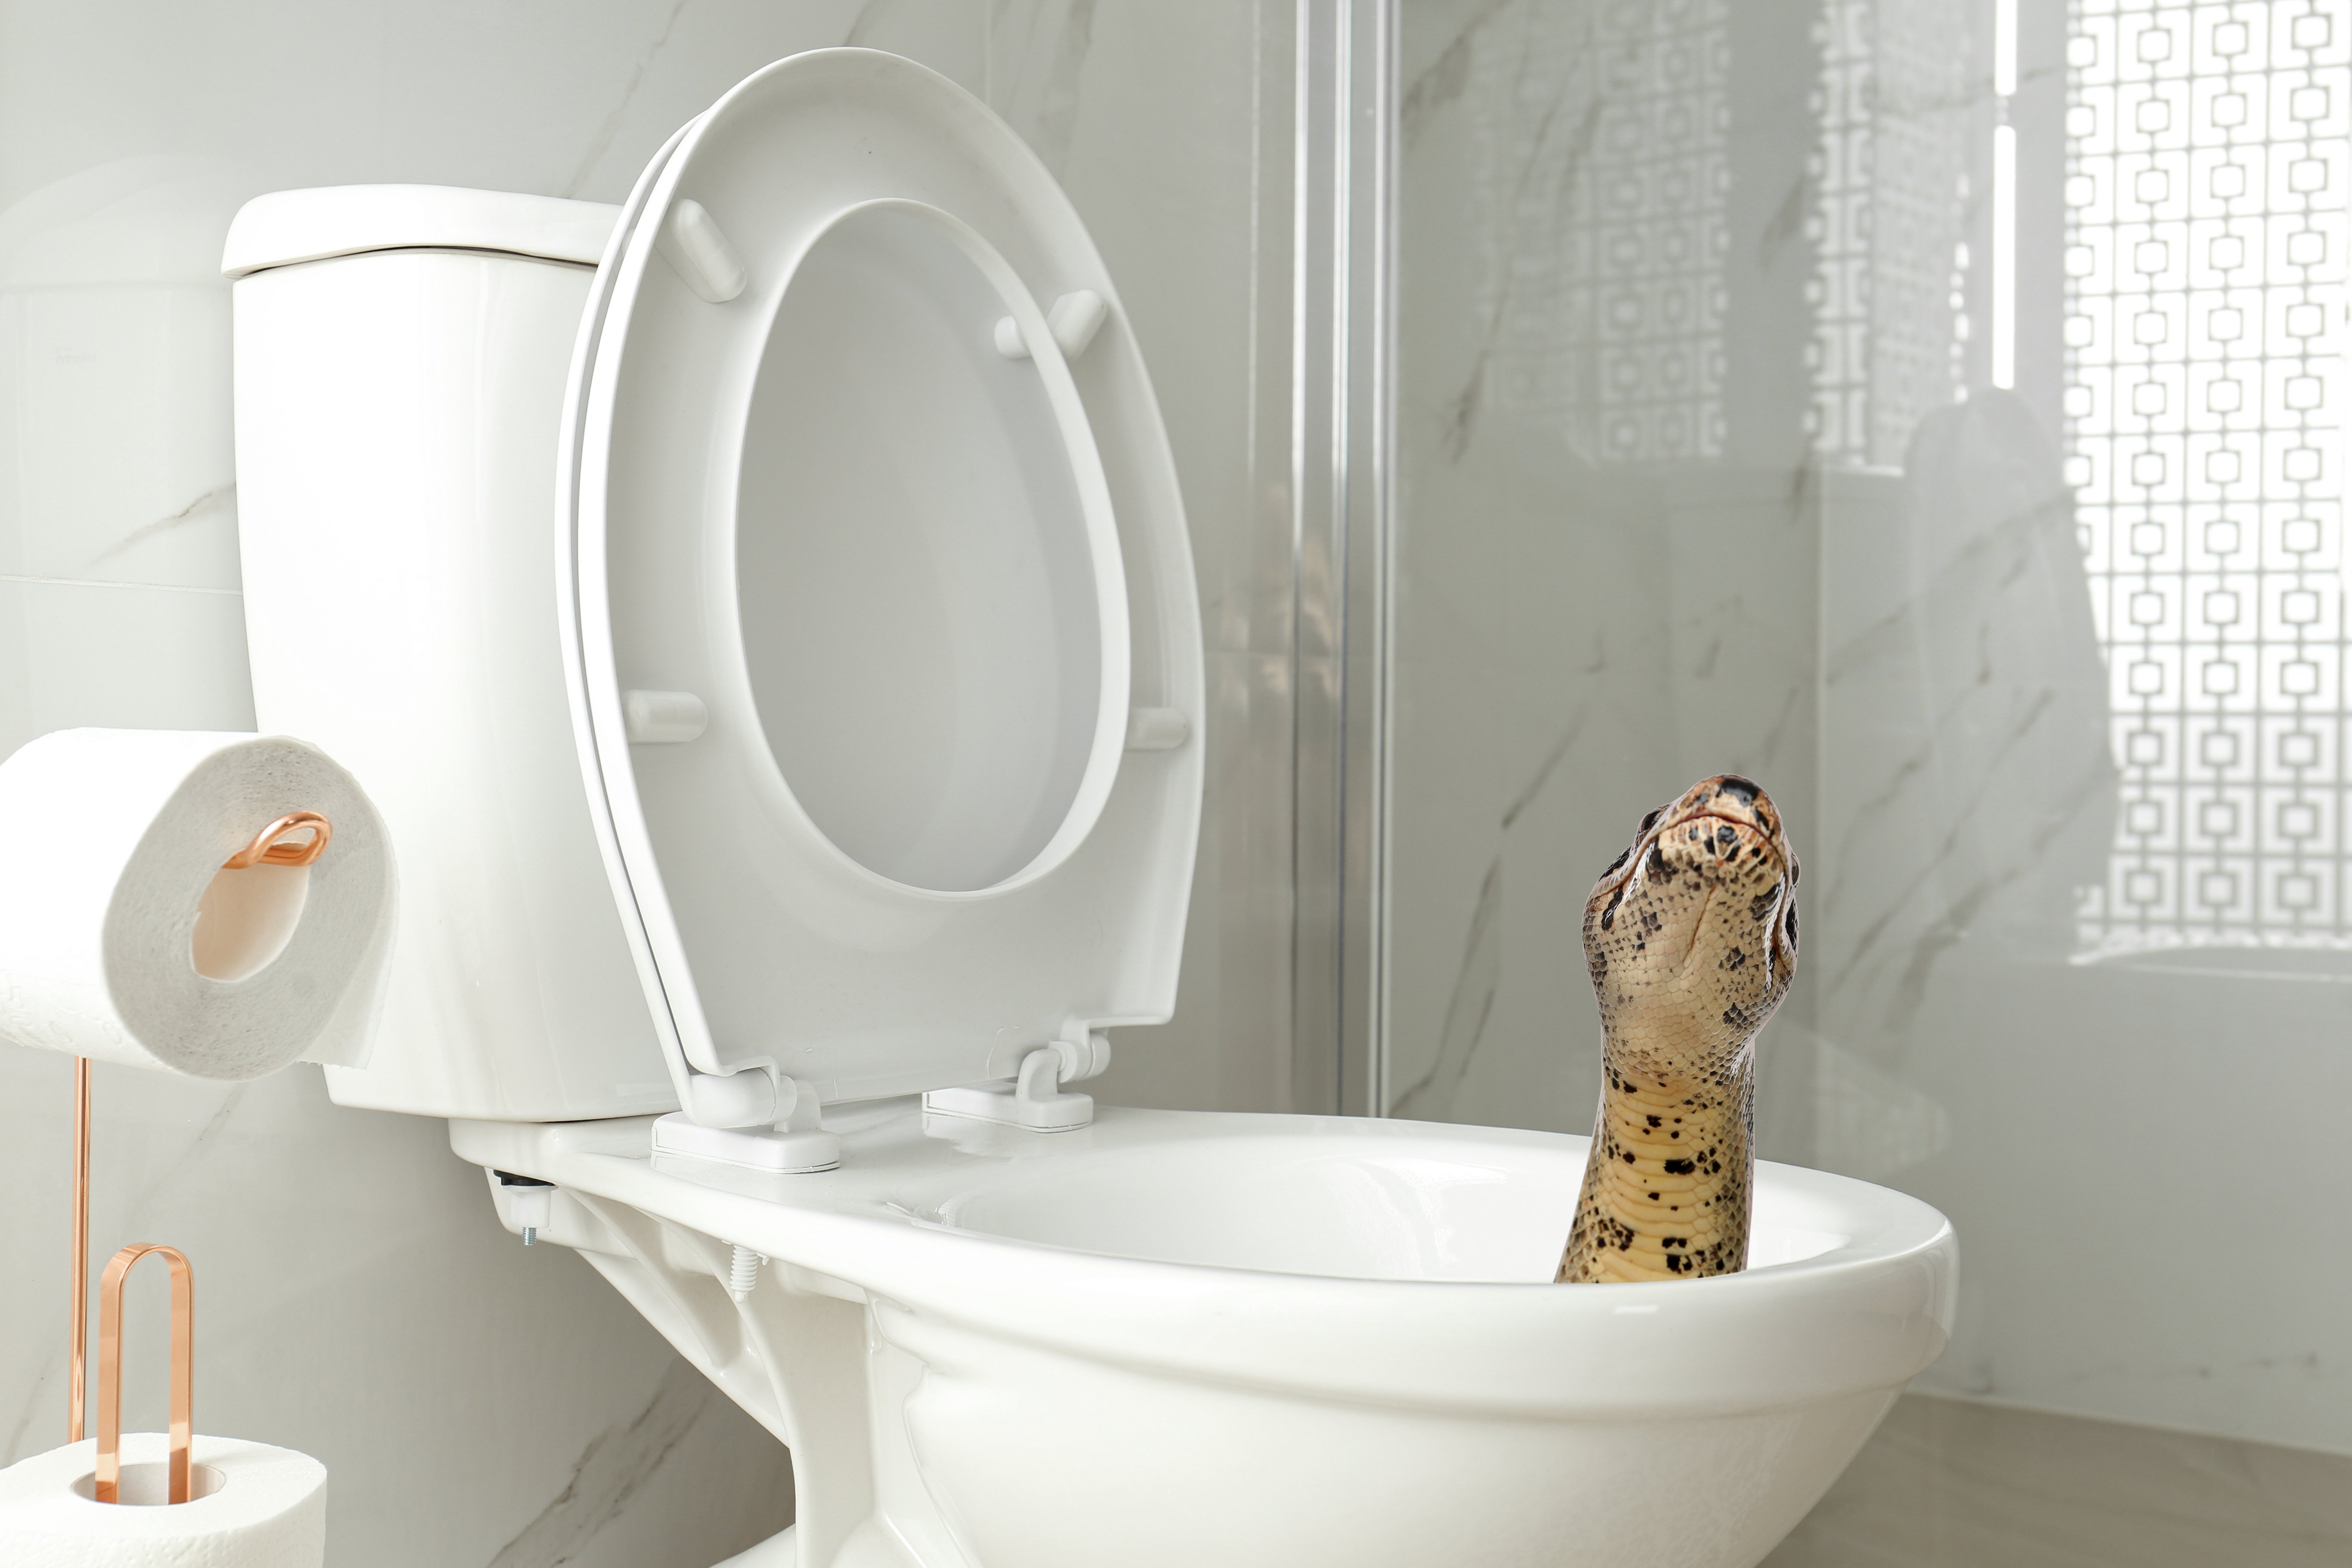 Brown boa constrictor on toilet bowl in bathroom | Photo: Shutterstock/New Africa 